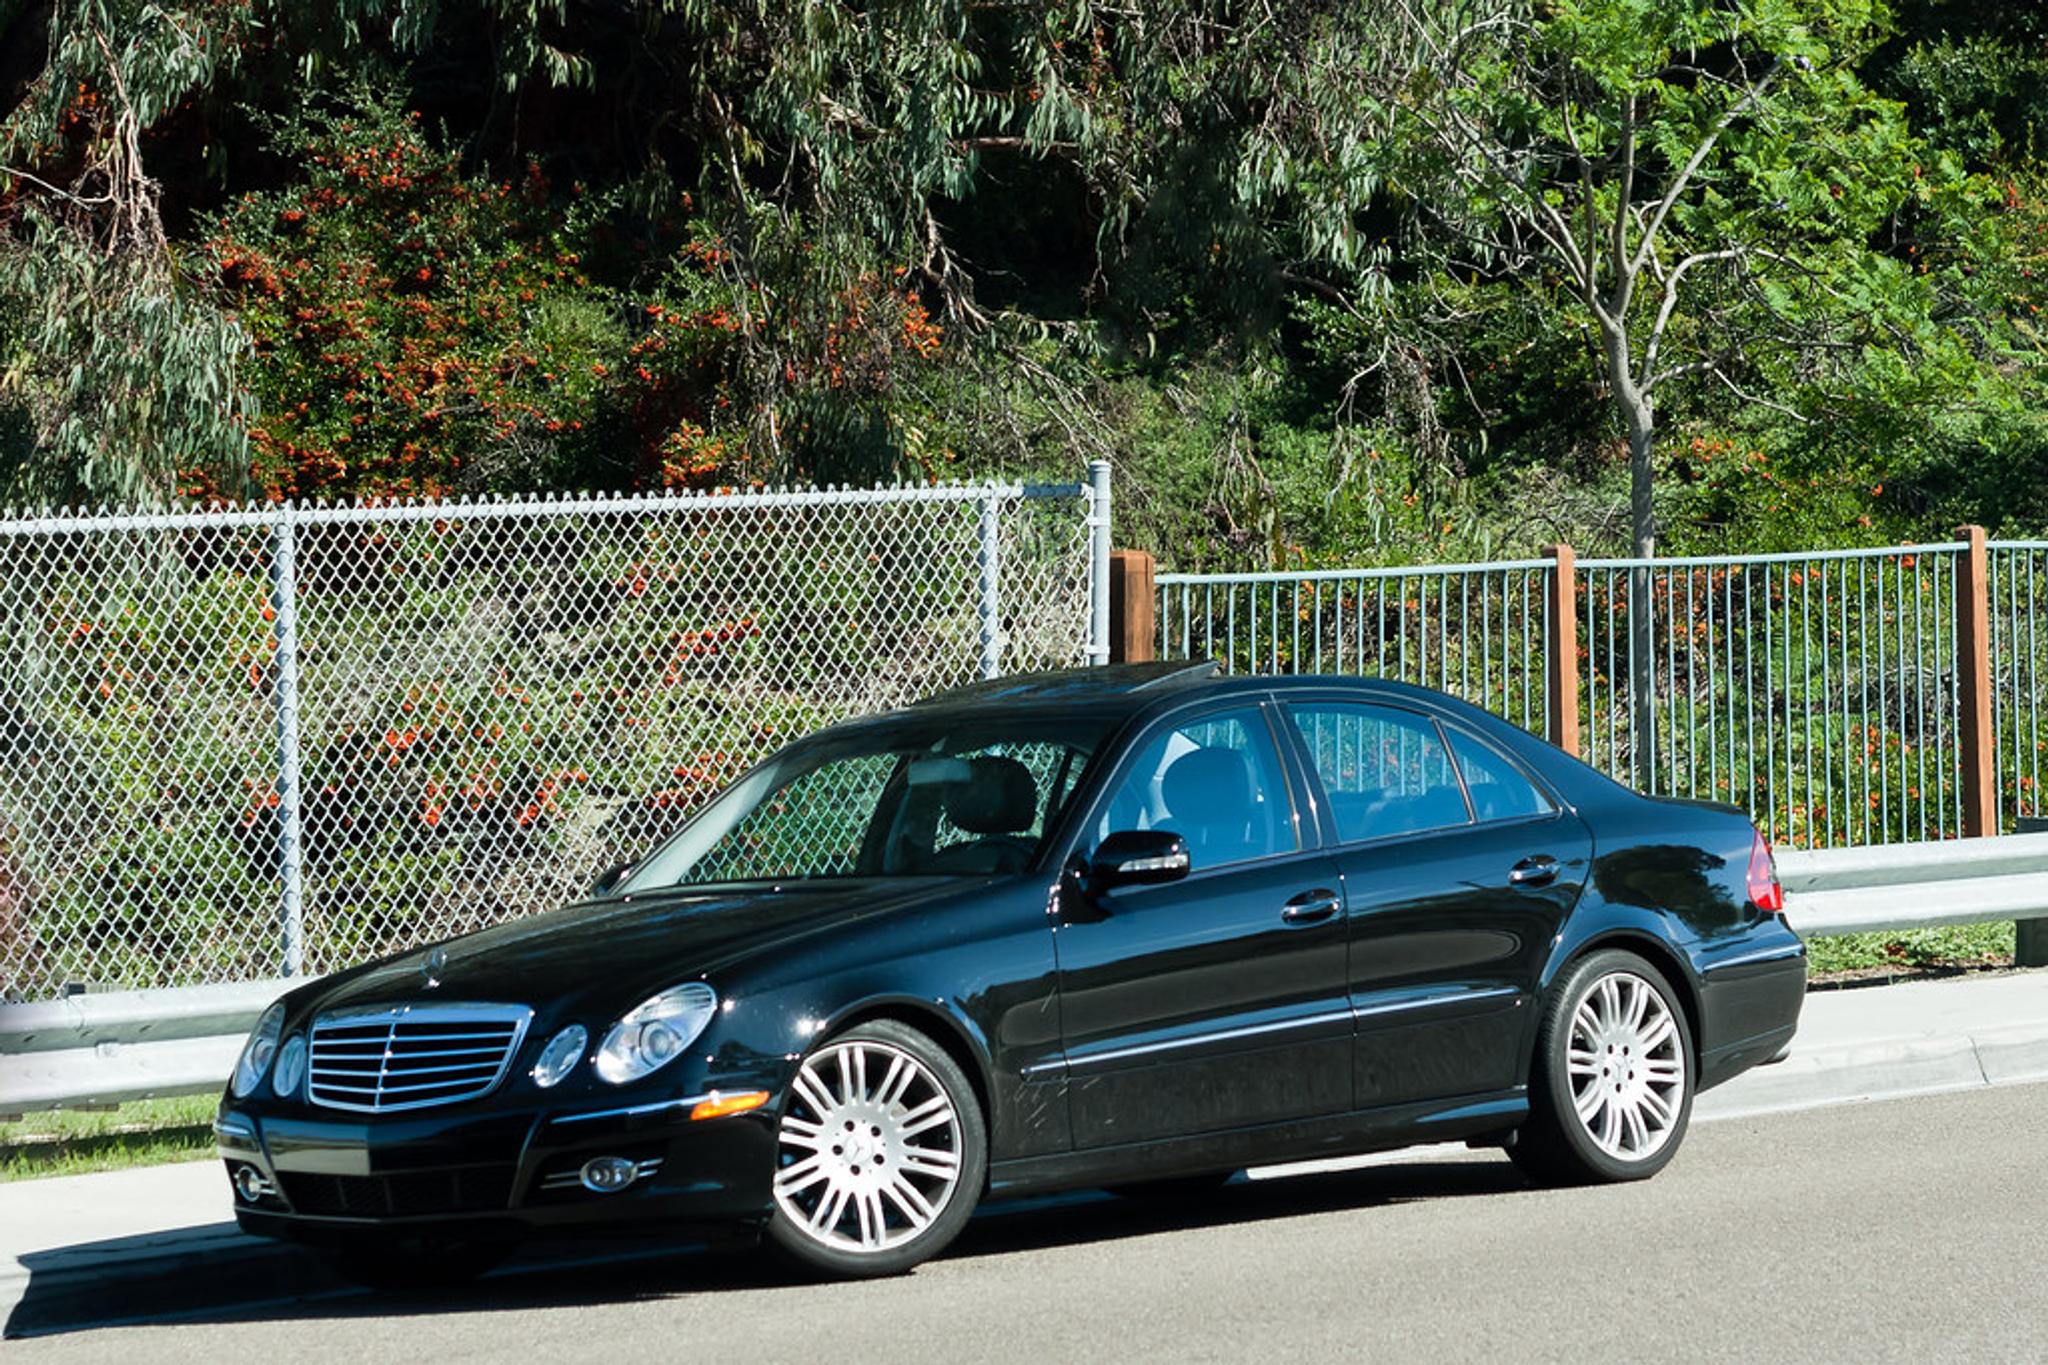 Black Mercedes Benz E Class W211 on the side of the road